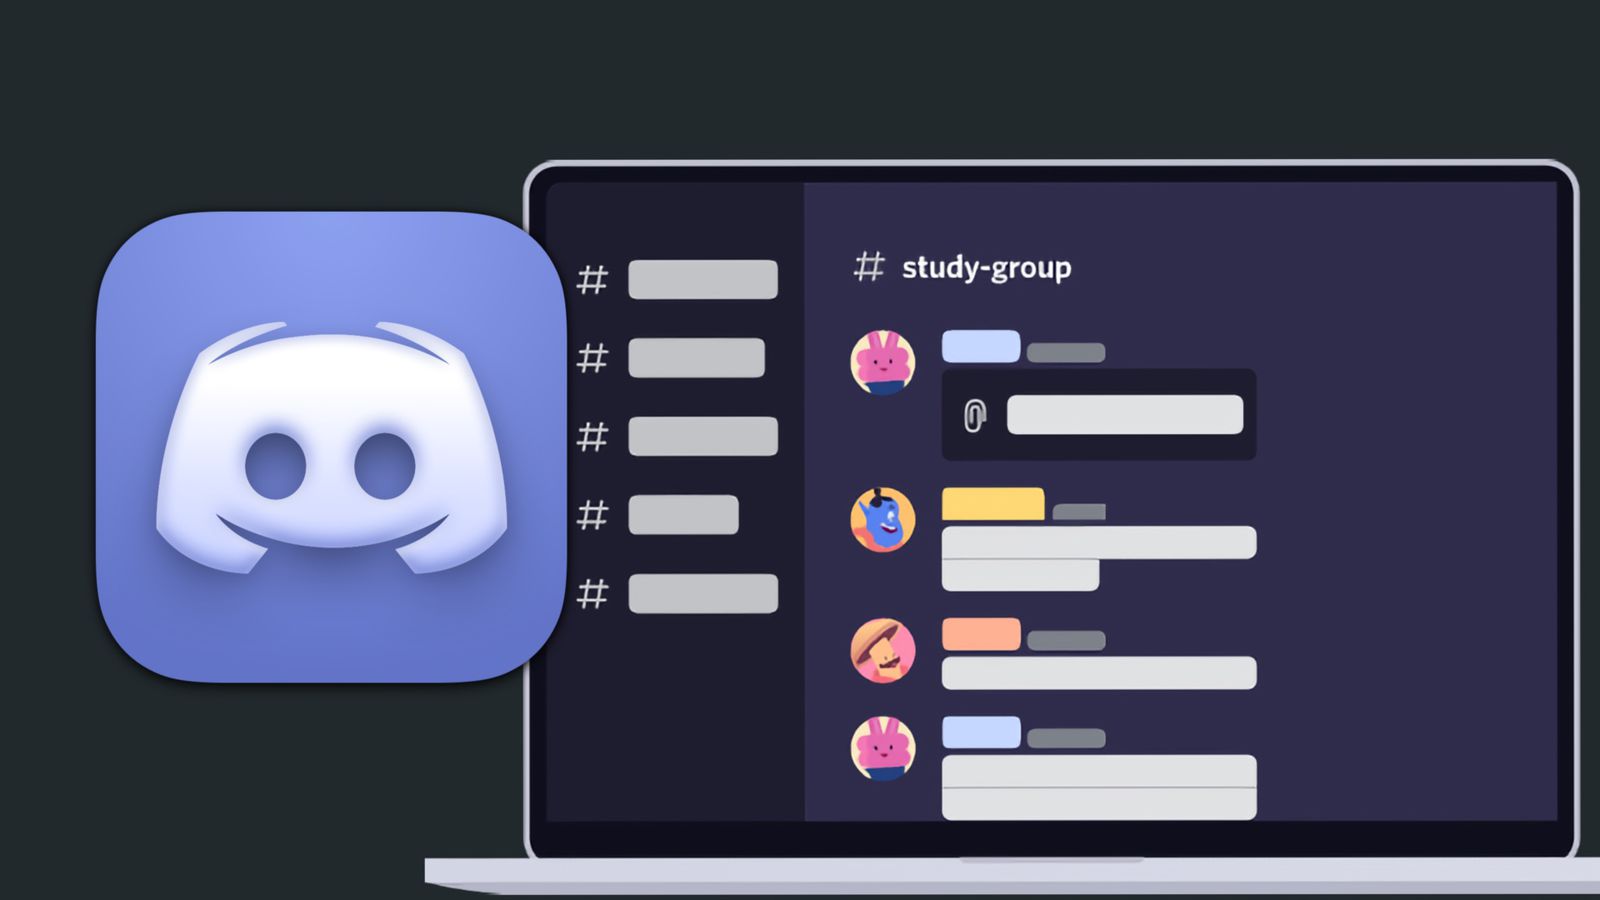 Webhook Permissions? I can't type in any category or server in Discord.  Macbook M1 : r/discordapp